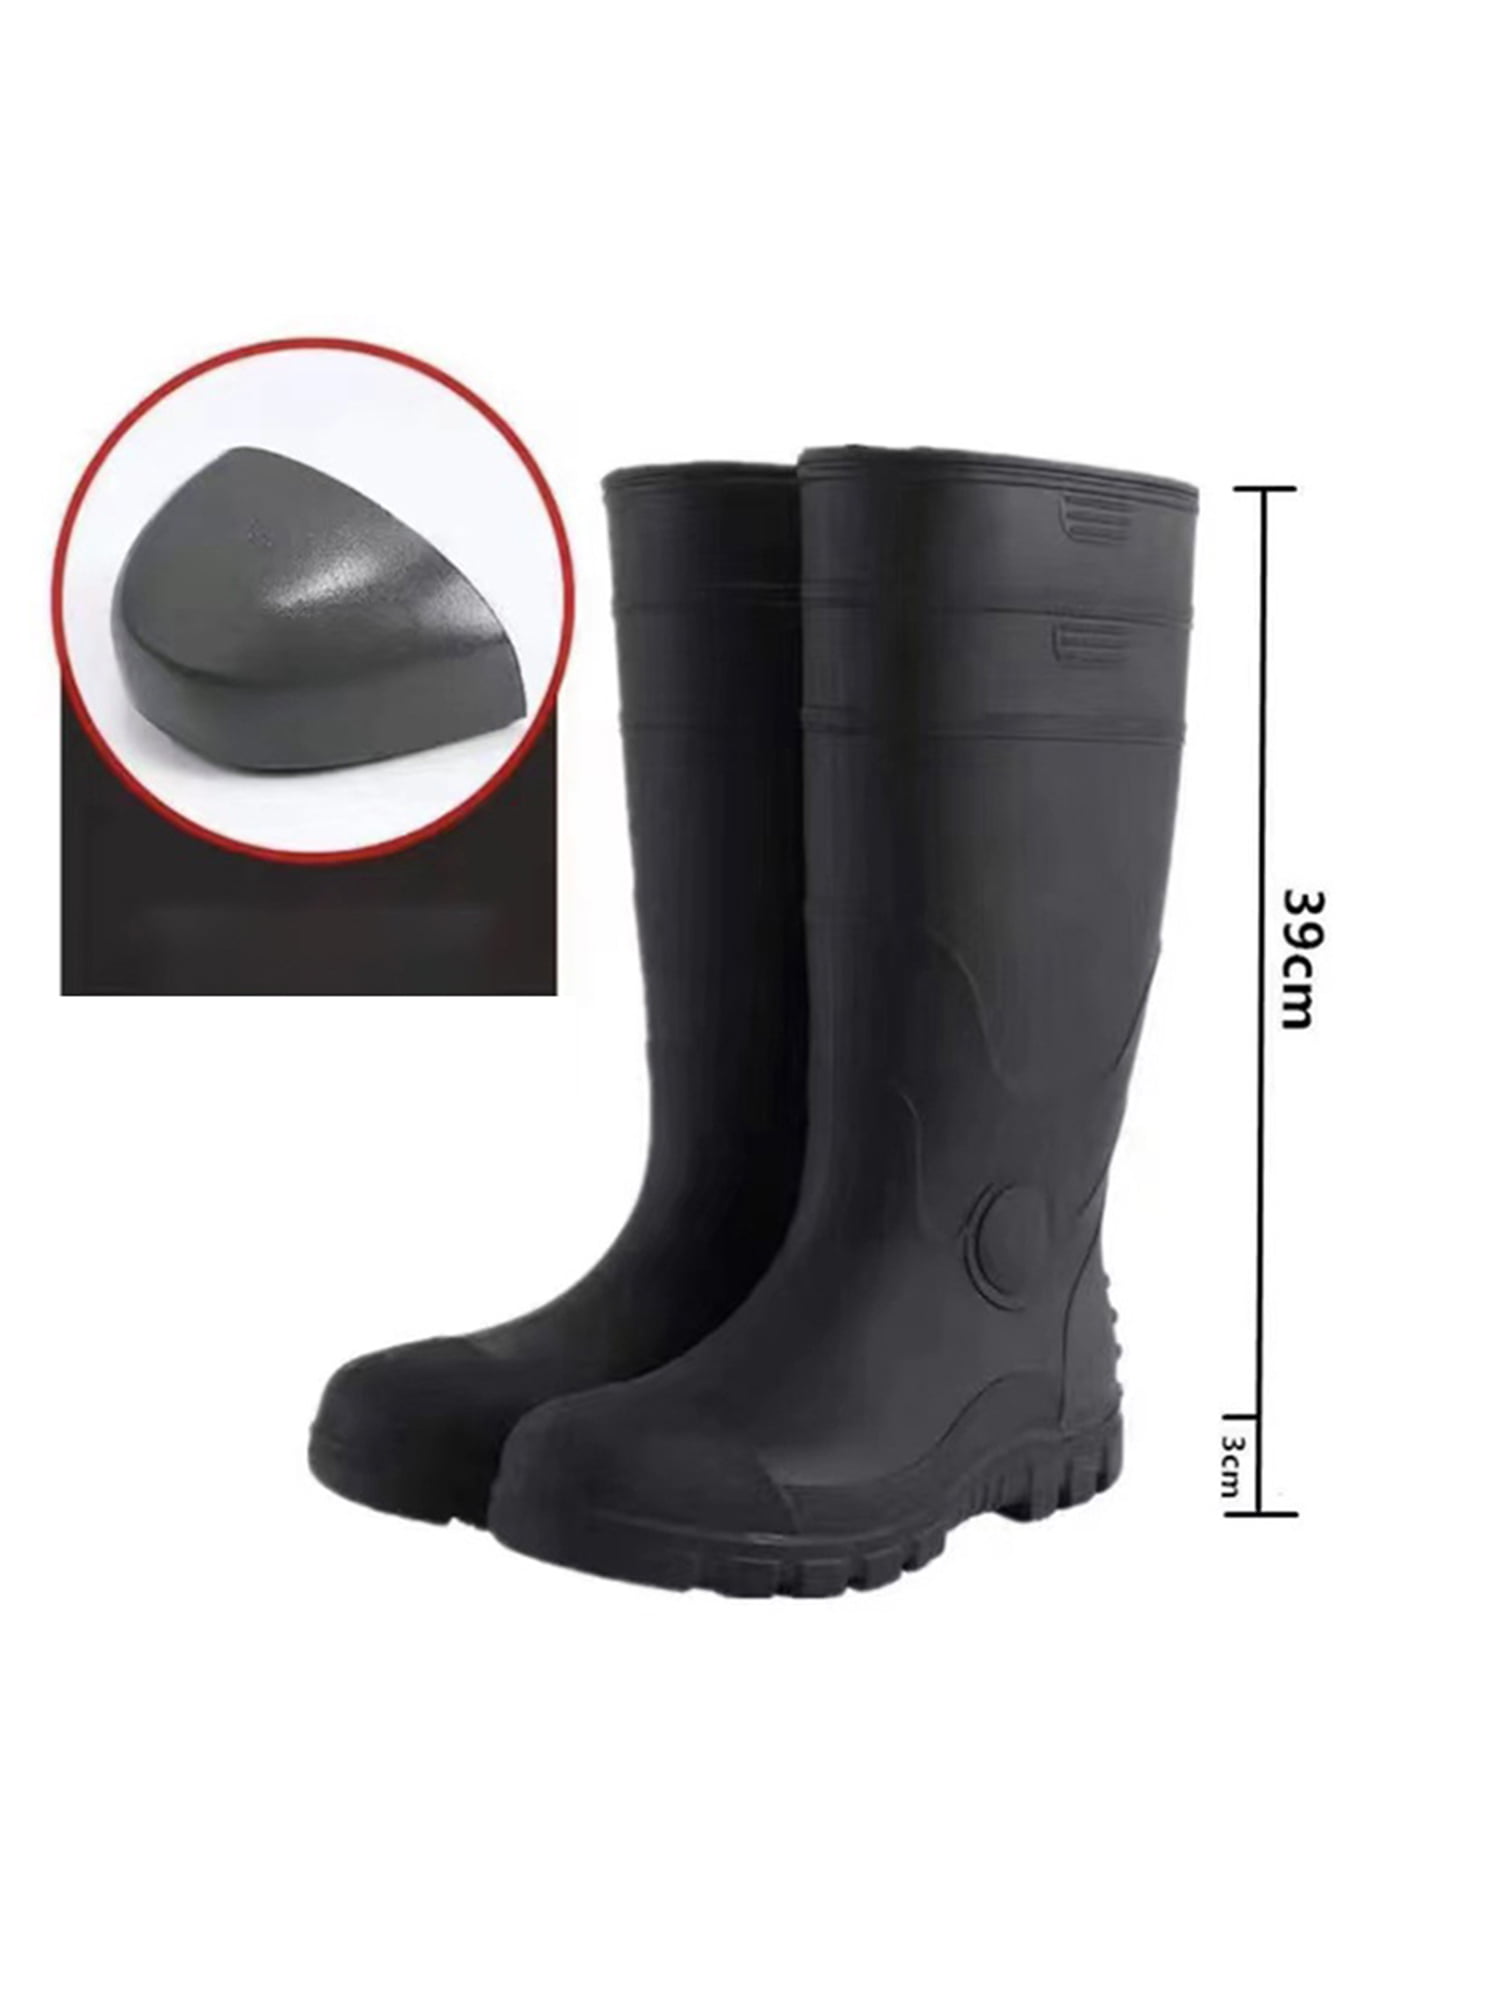 Men's Solid PVC Rain Boots, Slip On Non-slip Durable Waterproof Comfy Rain  Shoes For Outdoor Working Fishing